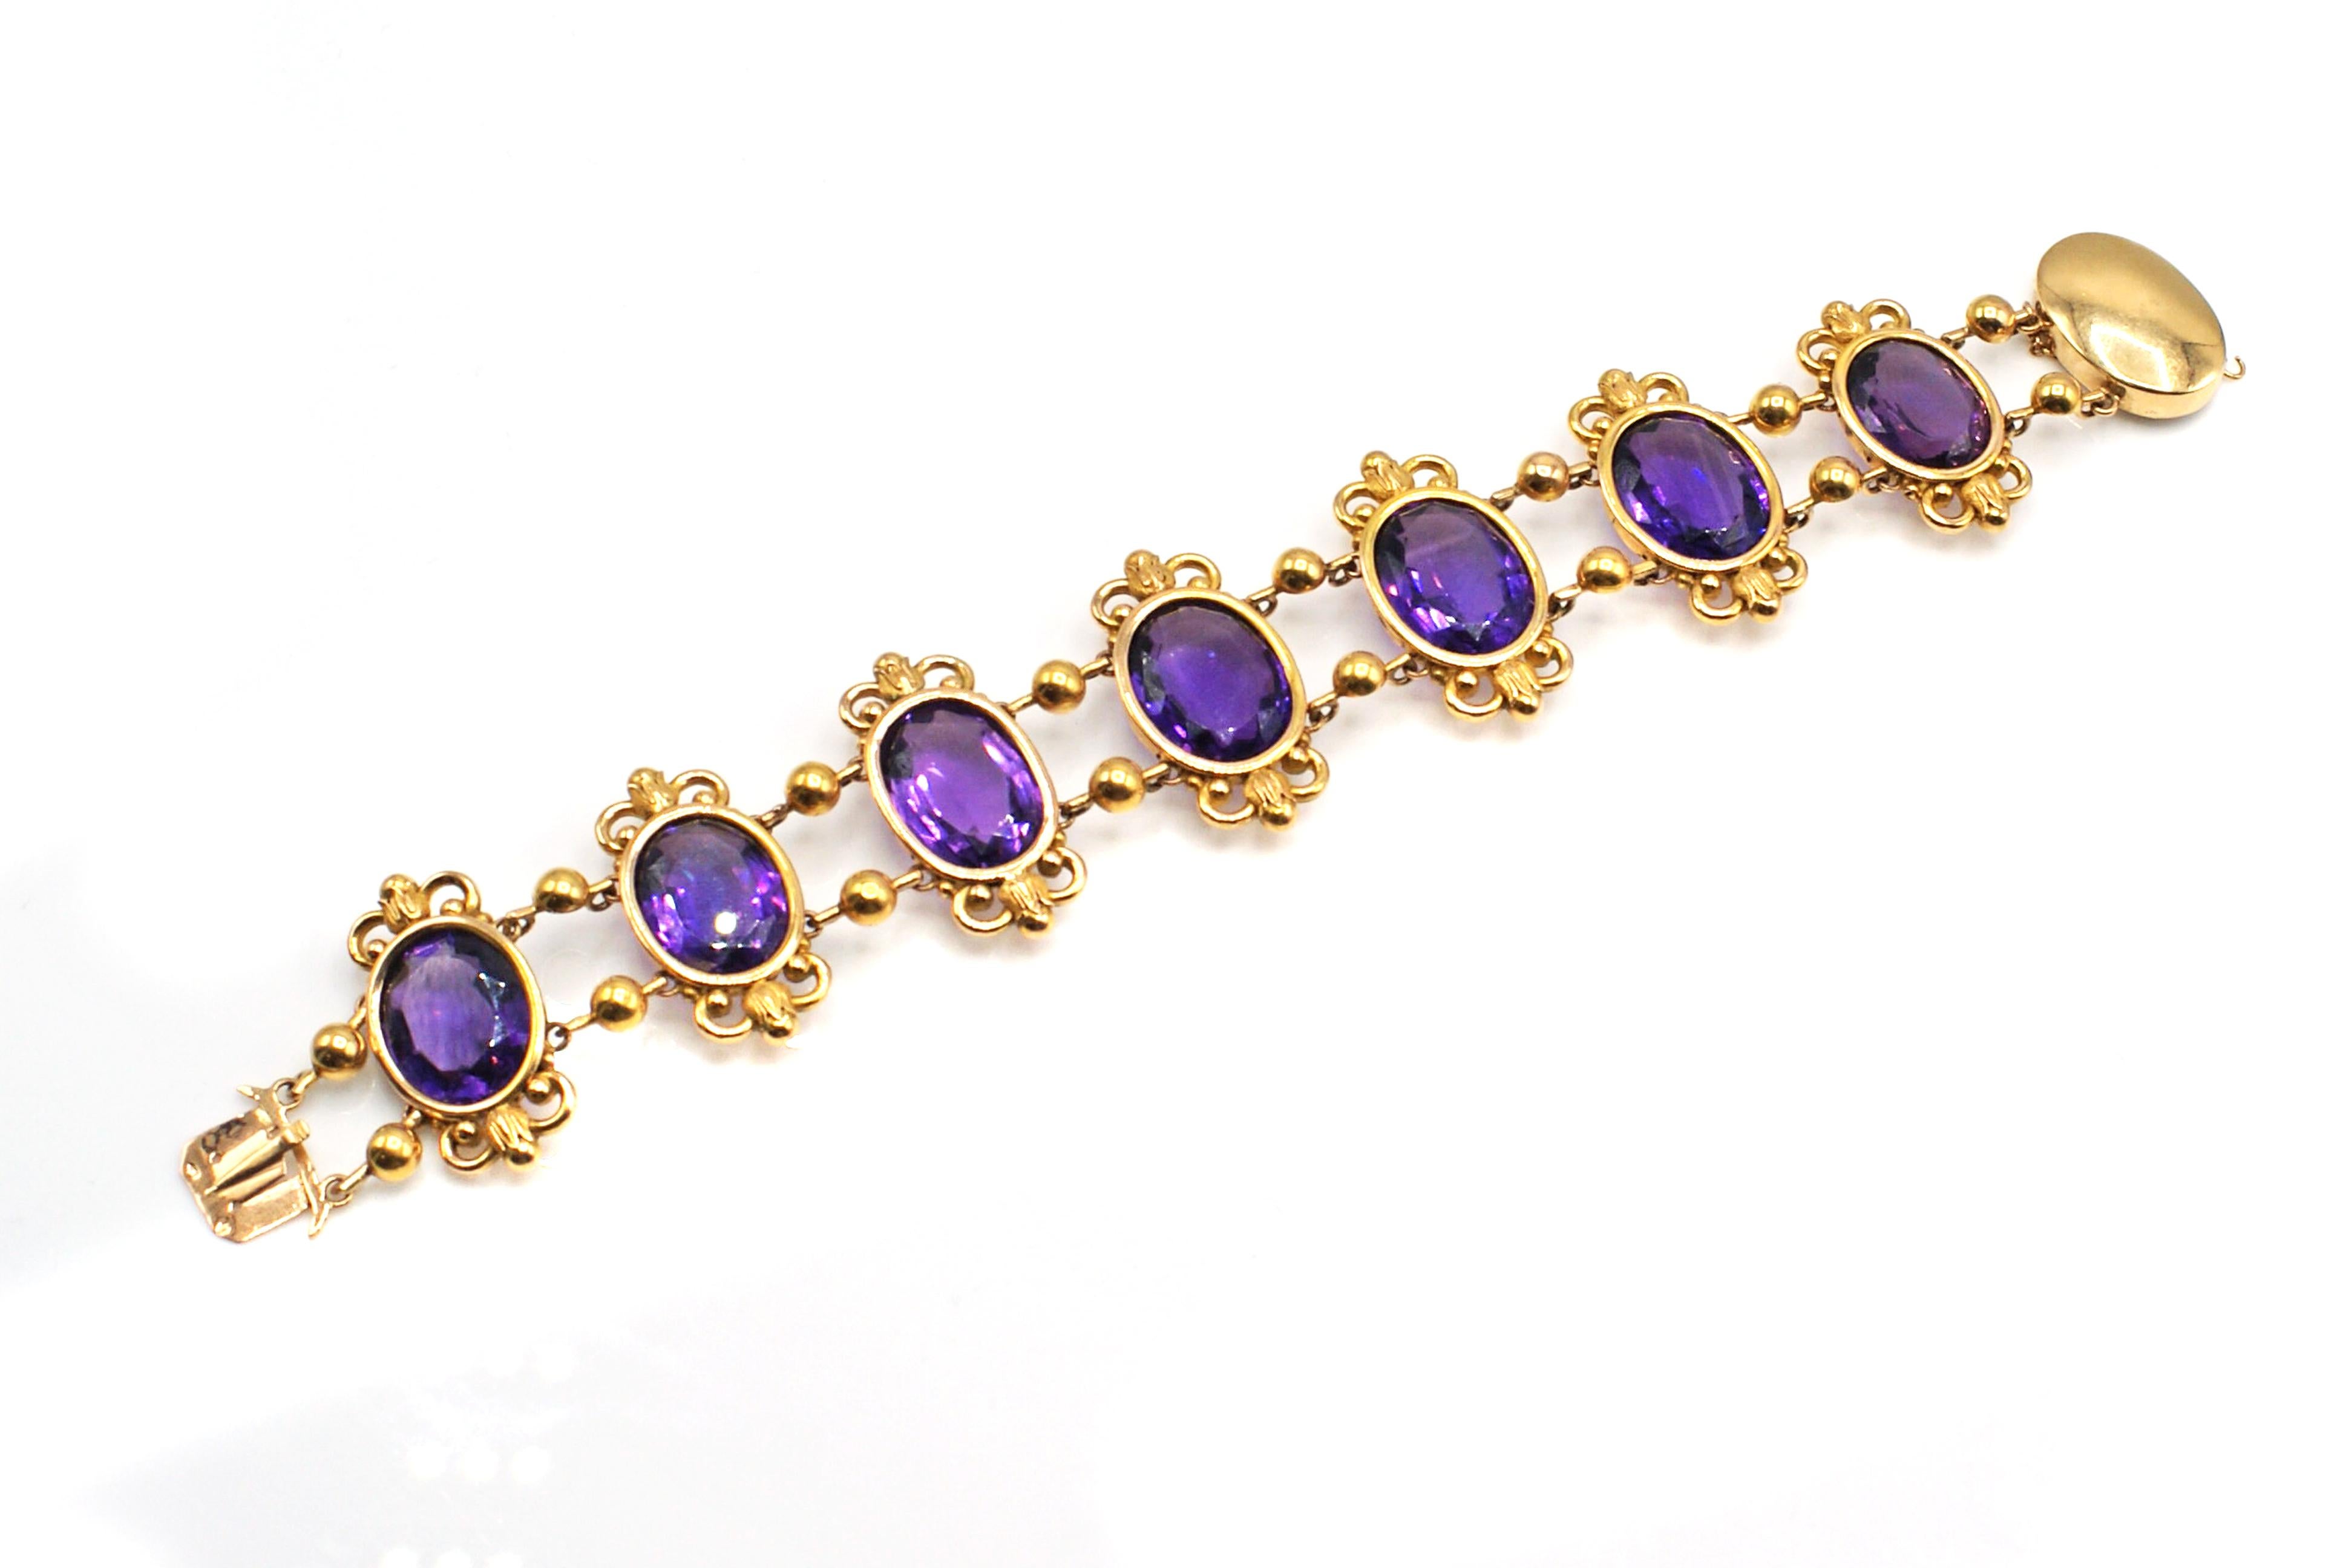 Gorgeous antique French Amethyst 18 karat yellow gold flexible link bracelet from ca. 1880. Seven beautiful, lively and sparkling deep violet Amethysts are the center pieces of this lovely bracelet. Perfectly matched in color and cut these gemstones